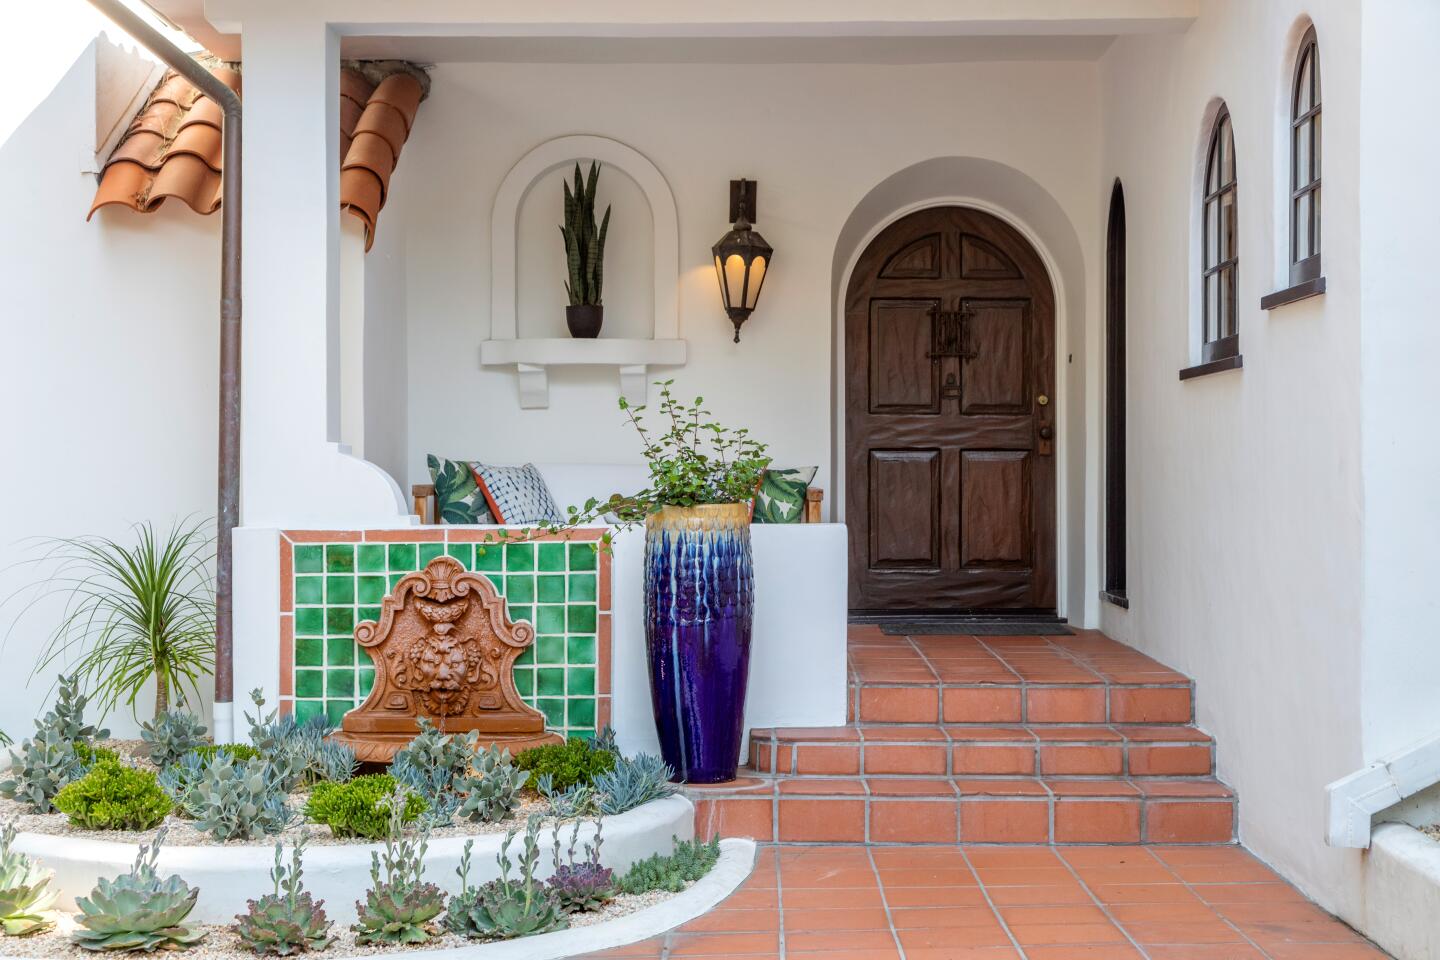 Colorful tilework creates visual interest around the entry.